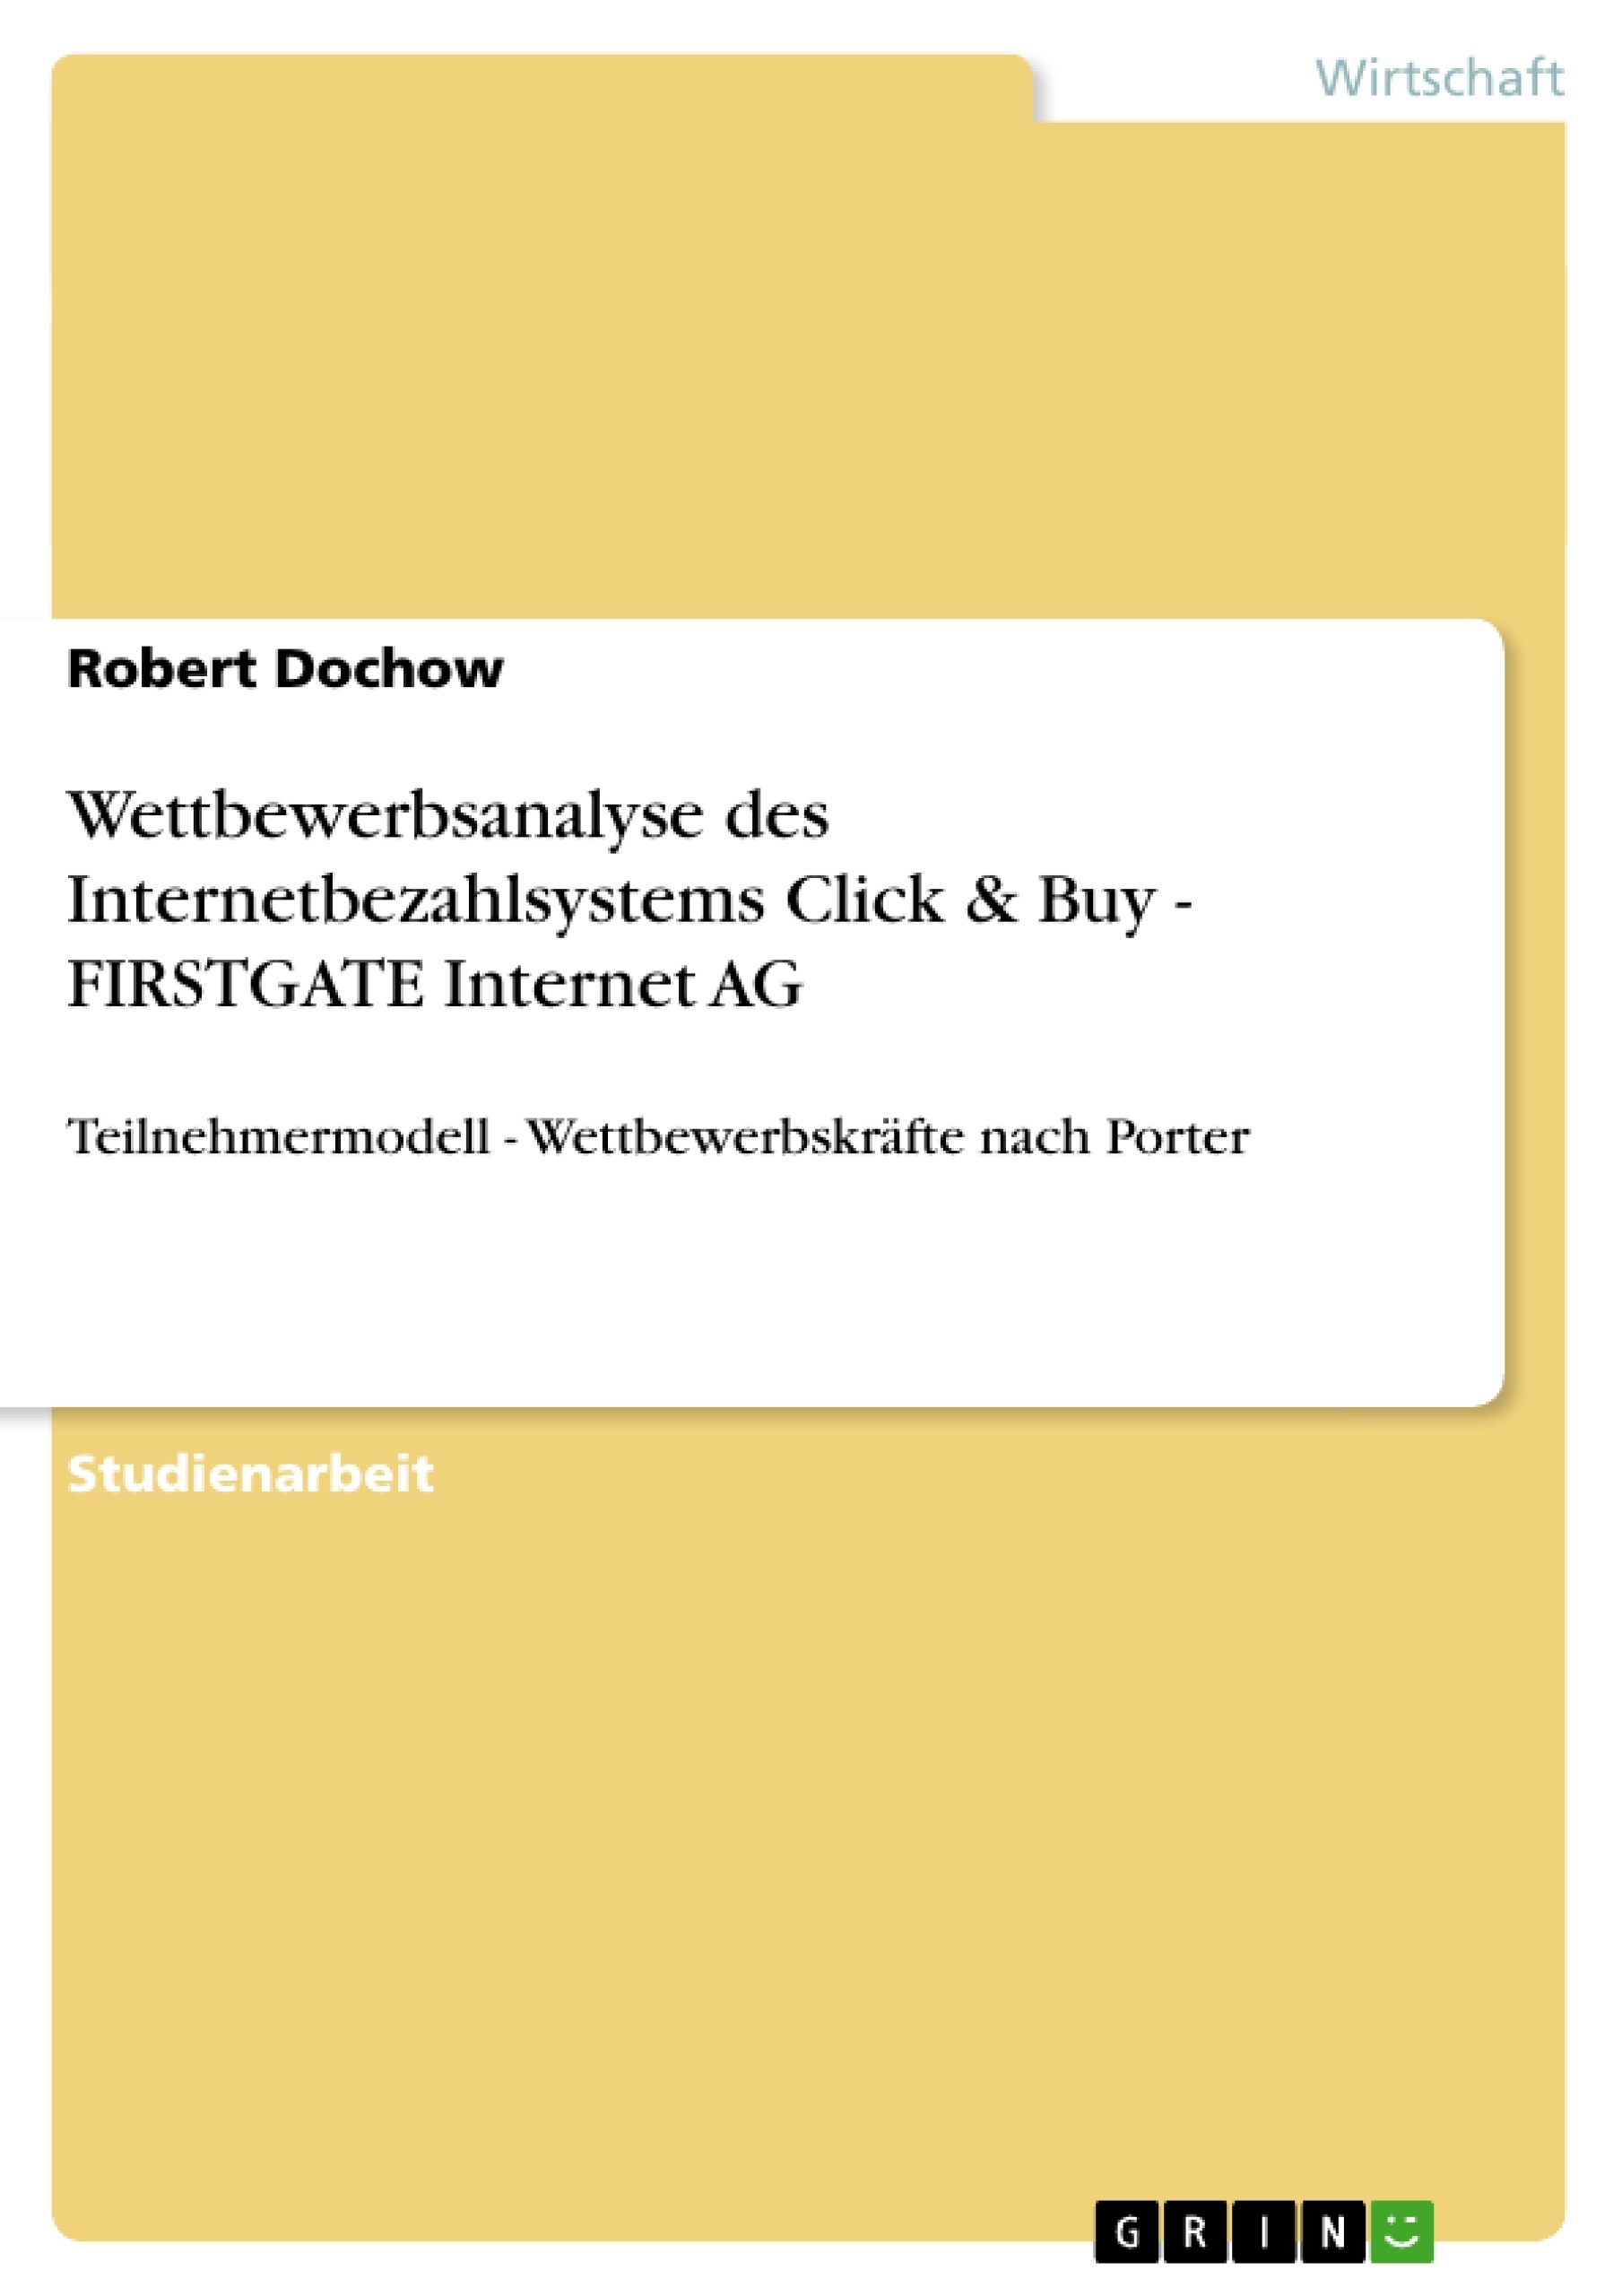 Title: Wettbewerbsanalyse des Internetbezahlsystems Click & Buy -  FIRSTGATE Internet AG